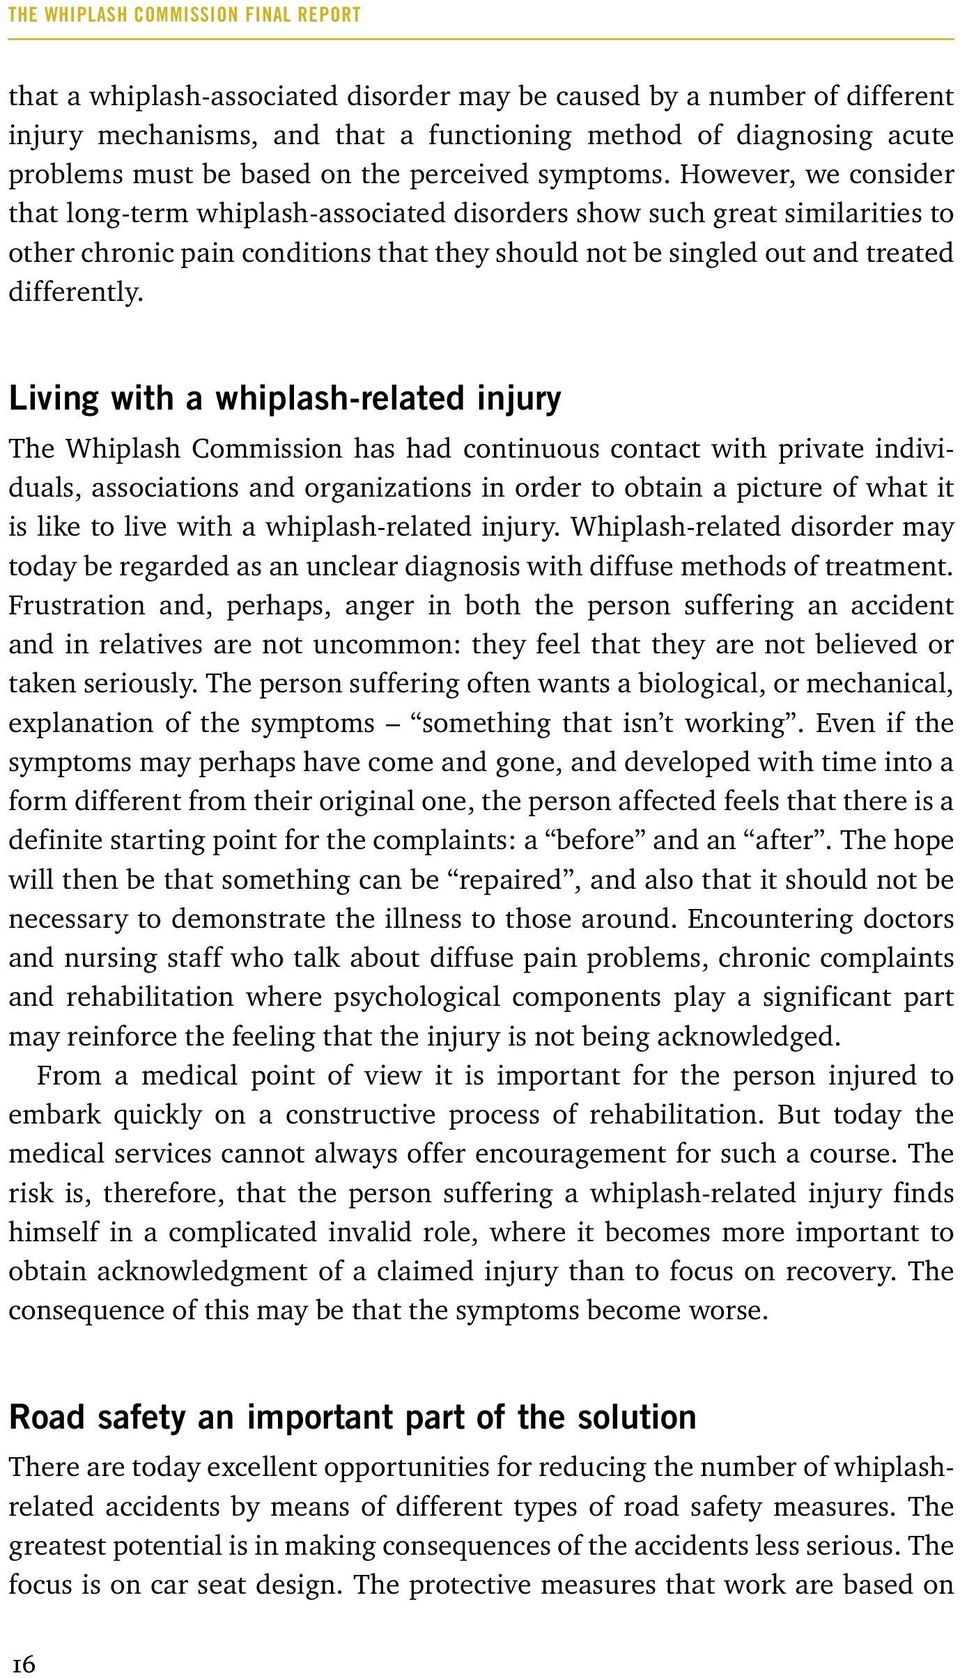 However, we consider that long-term whiplash-associated disorders show such great similarities to other chronic pain conditions that they should not be singled out and treated differently.